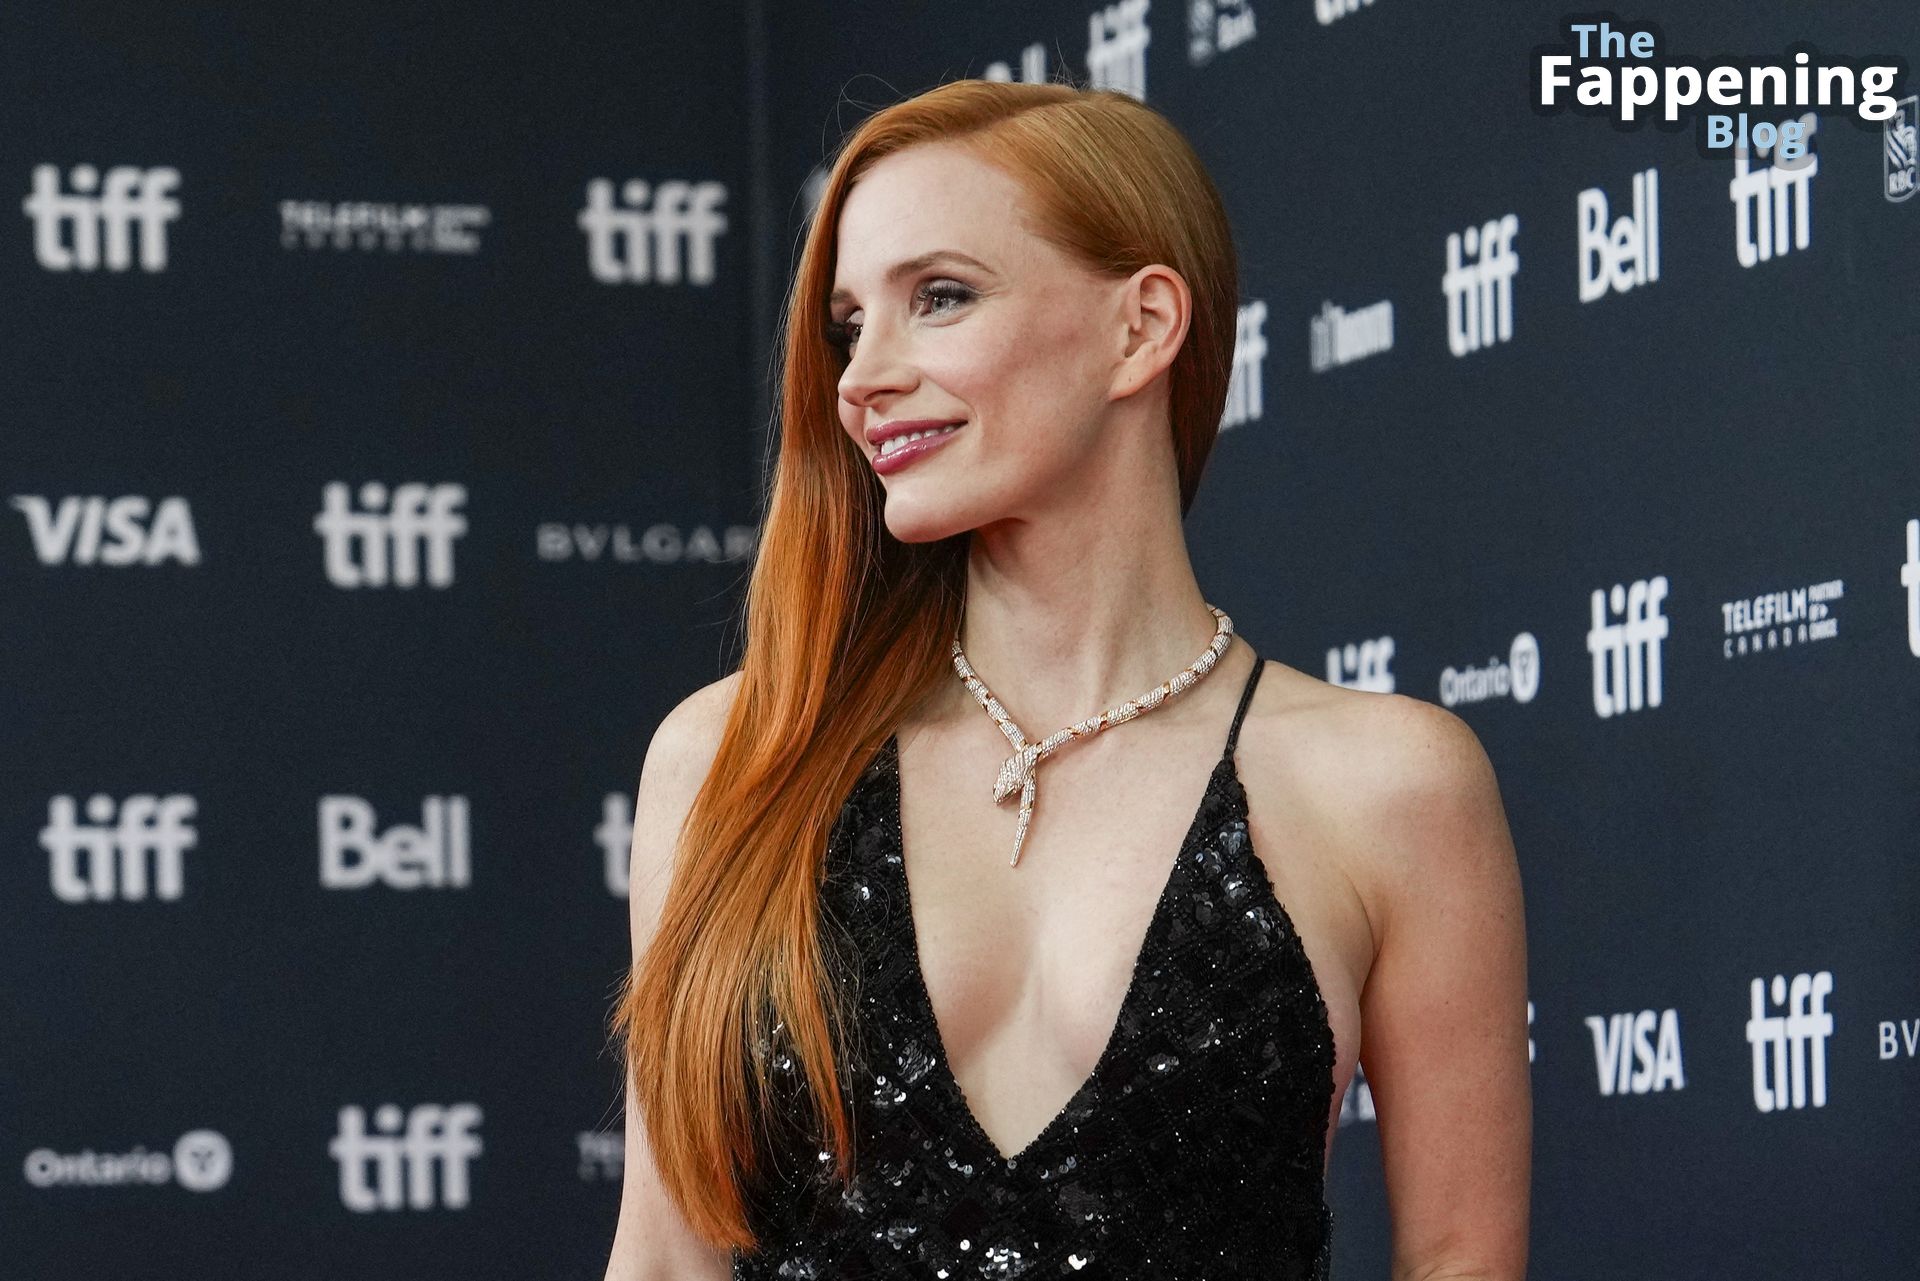 Jessica-Chastain-Sexy-4-The-Fappening-Blog.jpg